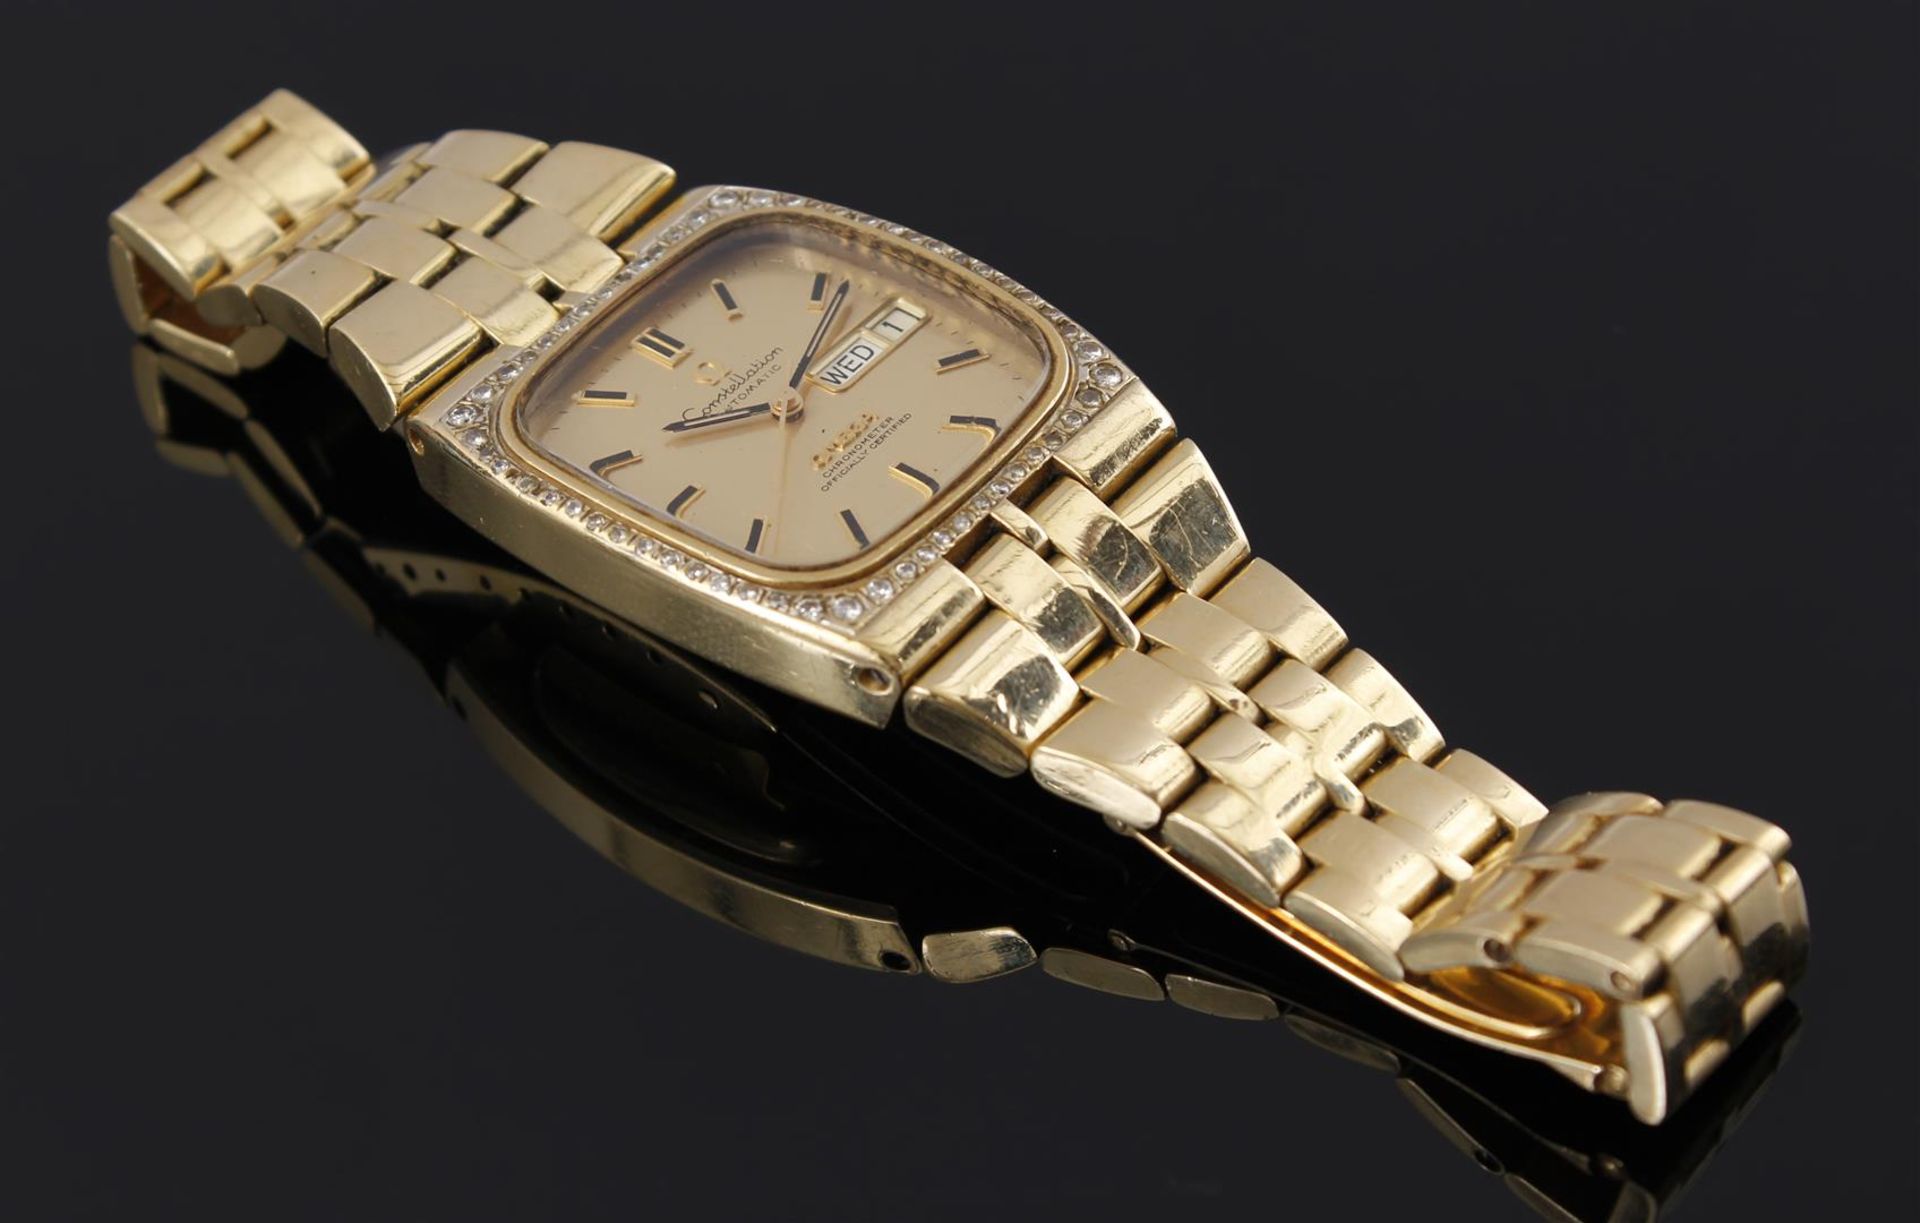 Omega Constellation wristwatch - Image 2 of 2